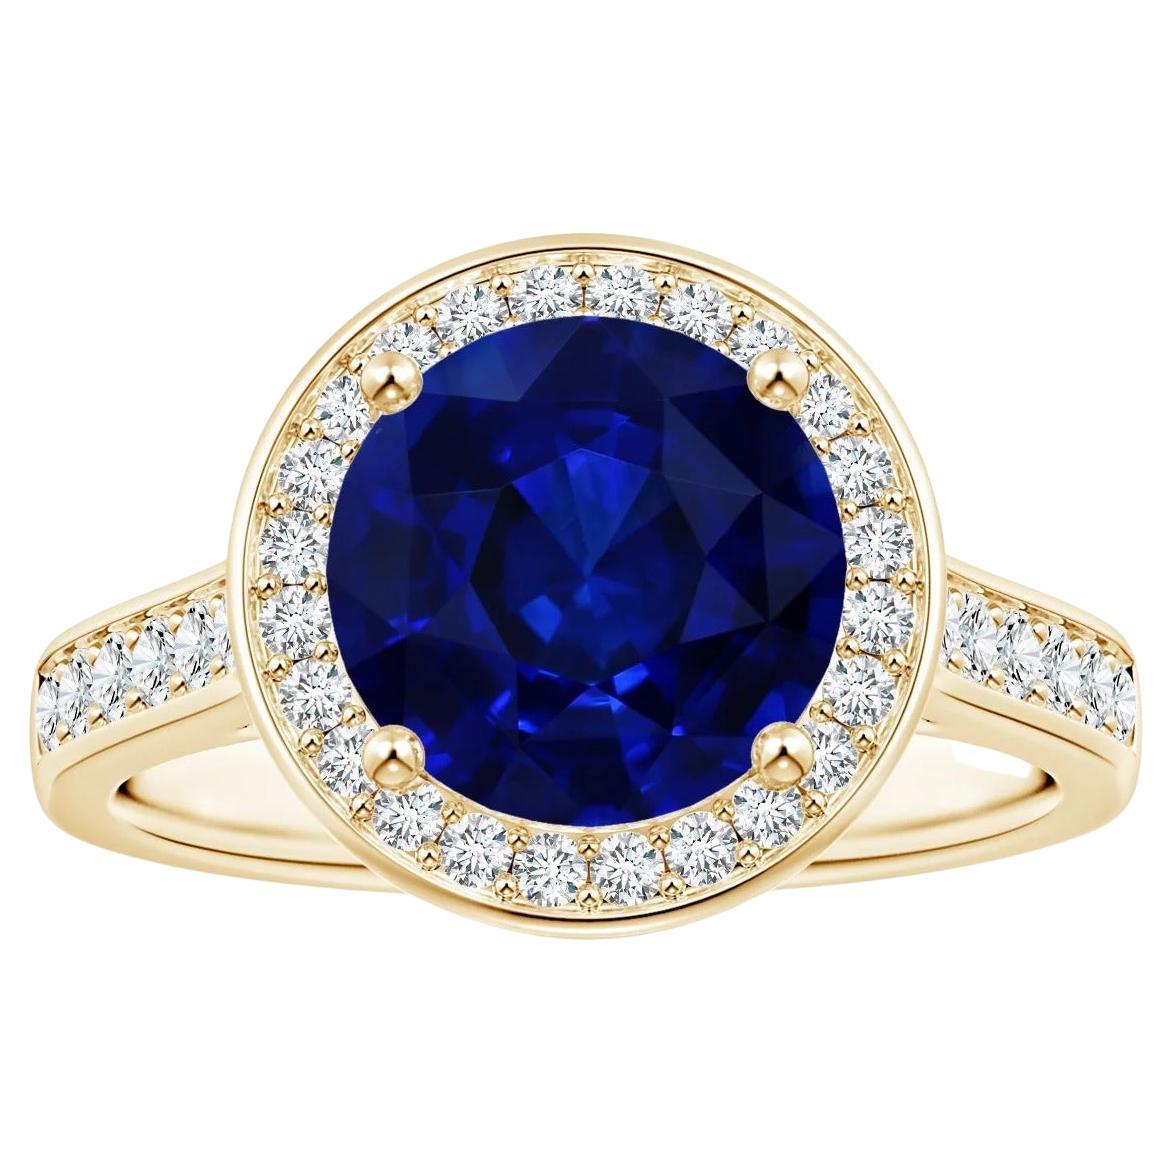 ANGARA GIA Certified Blue Sapphire Halo Ring in Yellow Gold with Diamonds